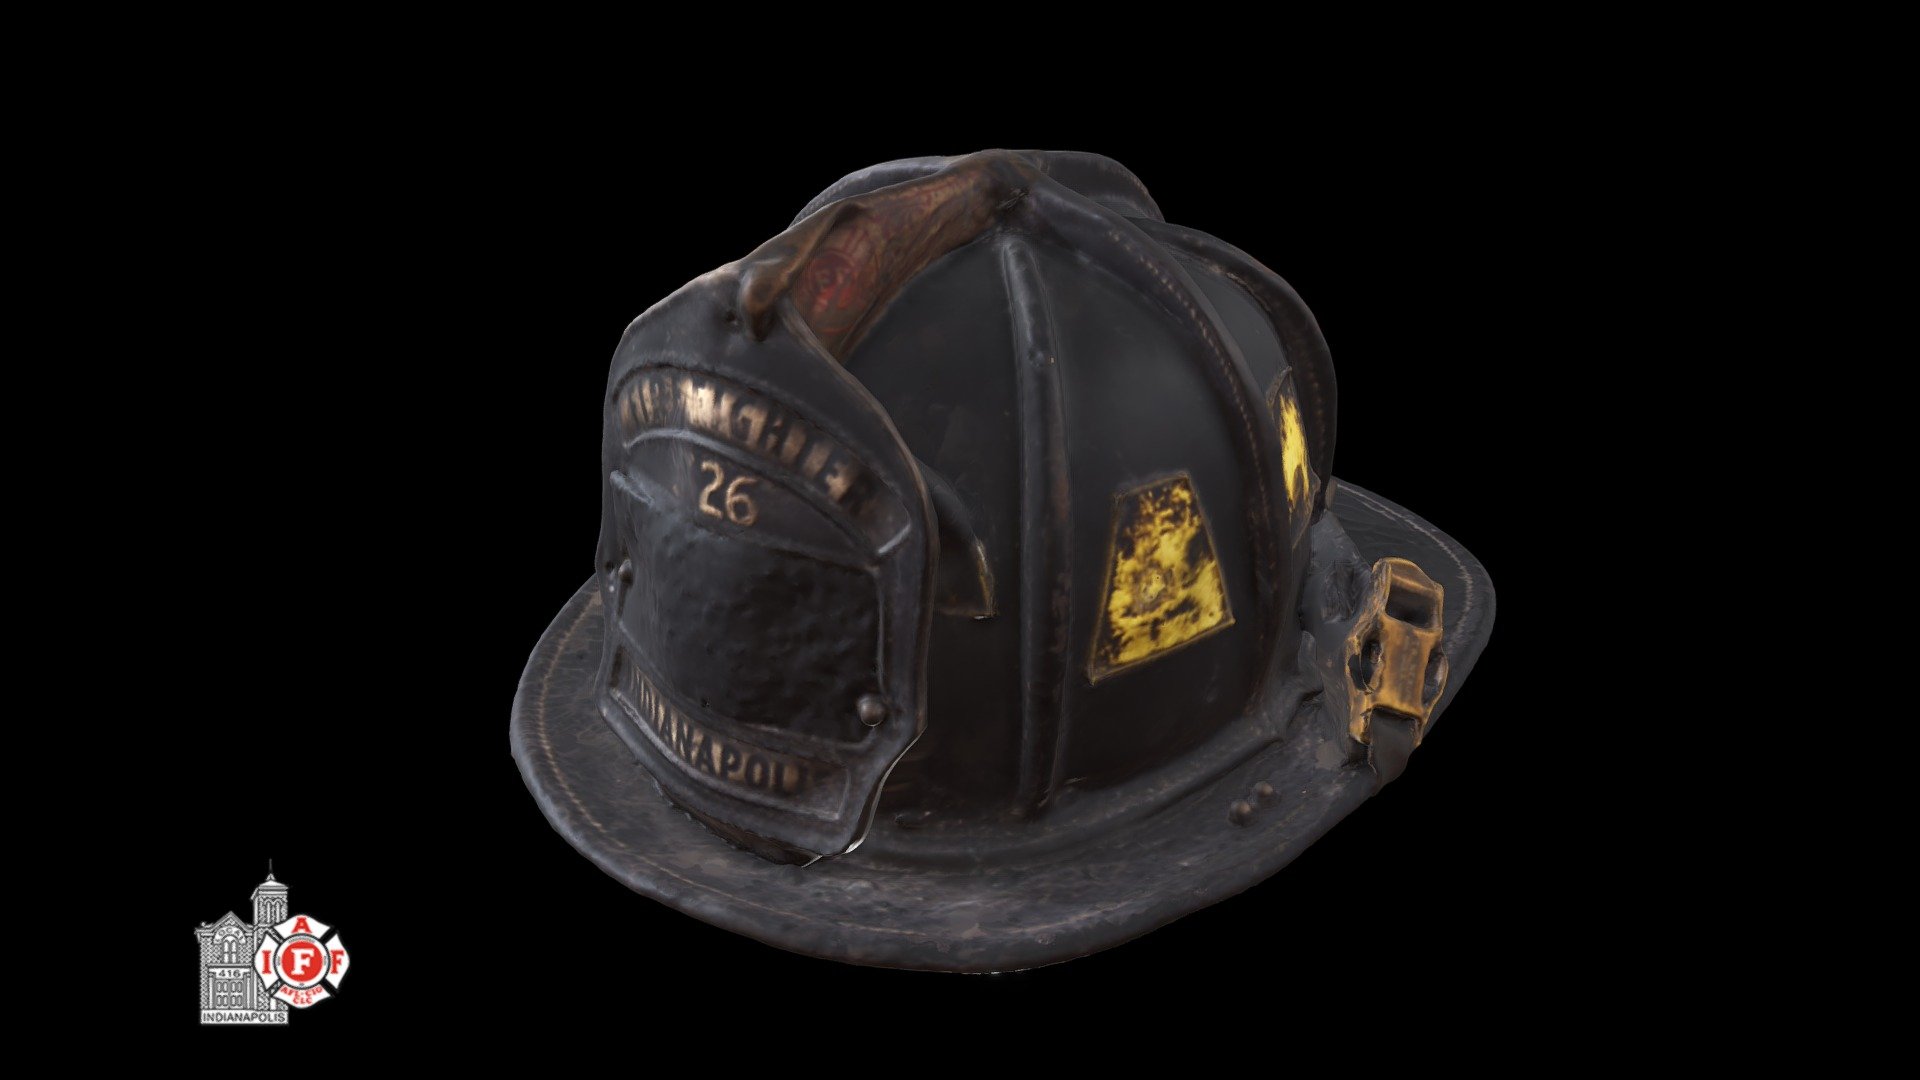 This item was 3D scanned using a Creaform Go Scan 50.

For more information about this object, feel free to visit: https://www.visitindy.com/indianapolis-firefighters-museum-historical-society - Peglow Helmet - Download Free 3D model by Connections XR (@connectionsxr) 3d model